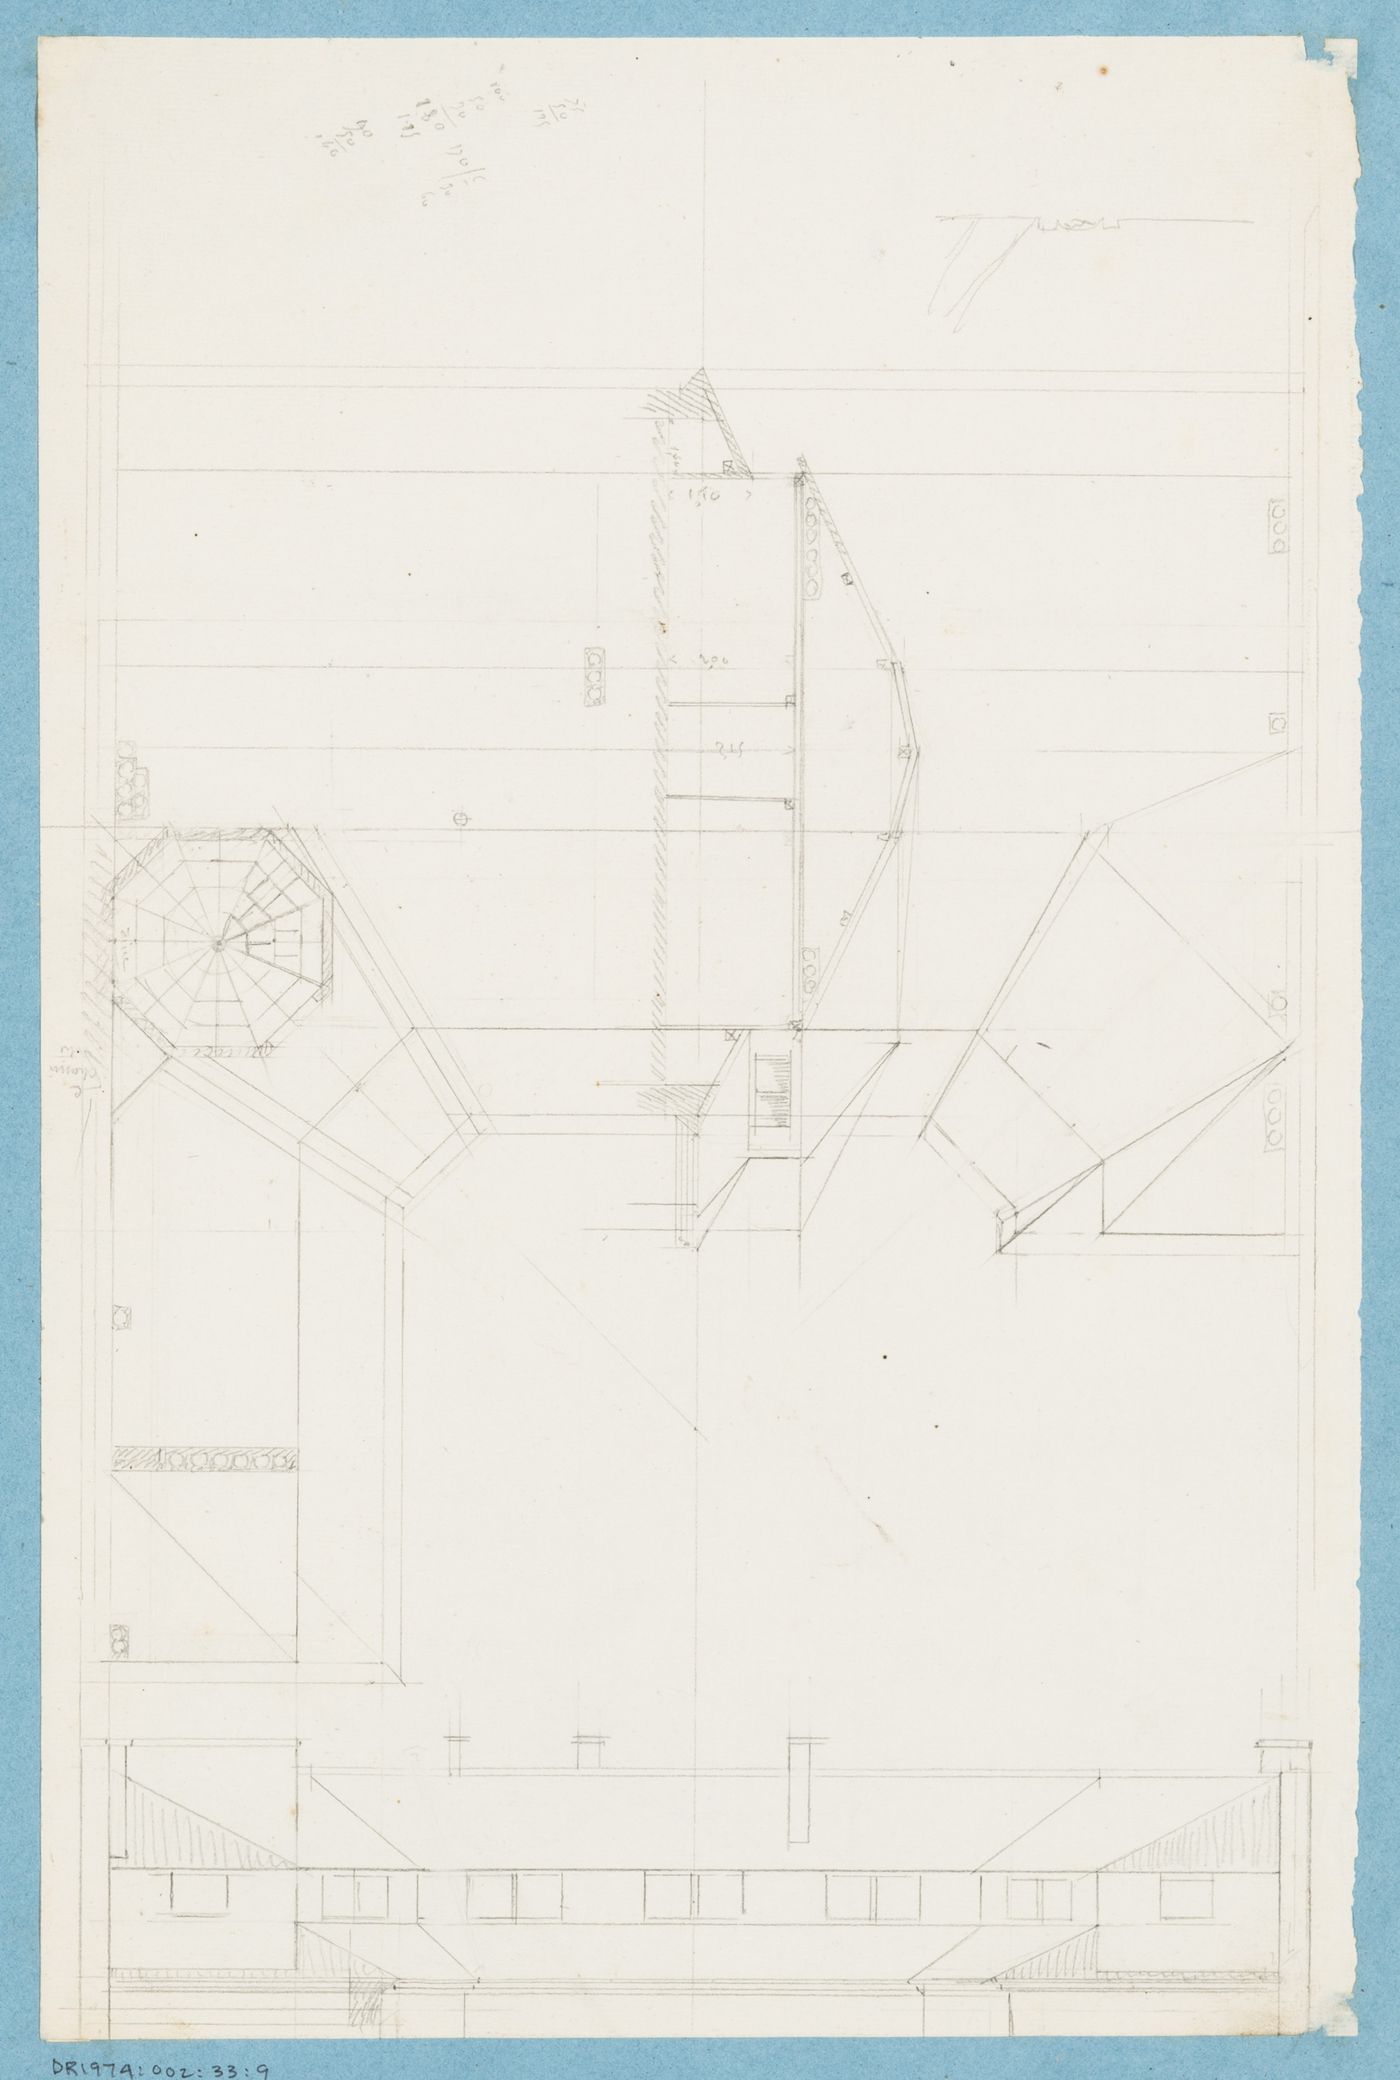 Project for a hôtel for M. Busche: Plan, elevation and section for the roof for a four-storey hôtel